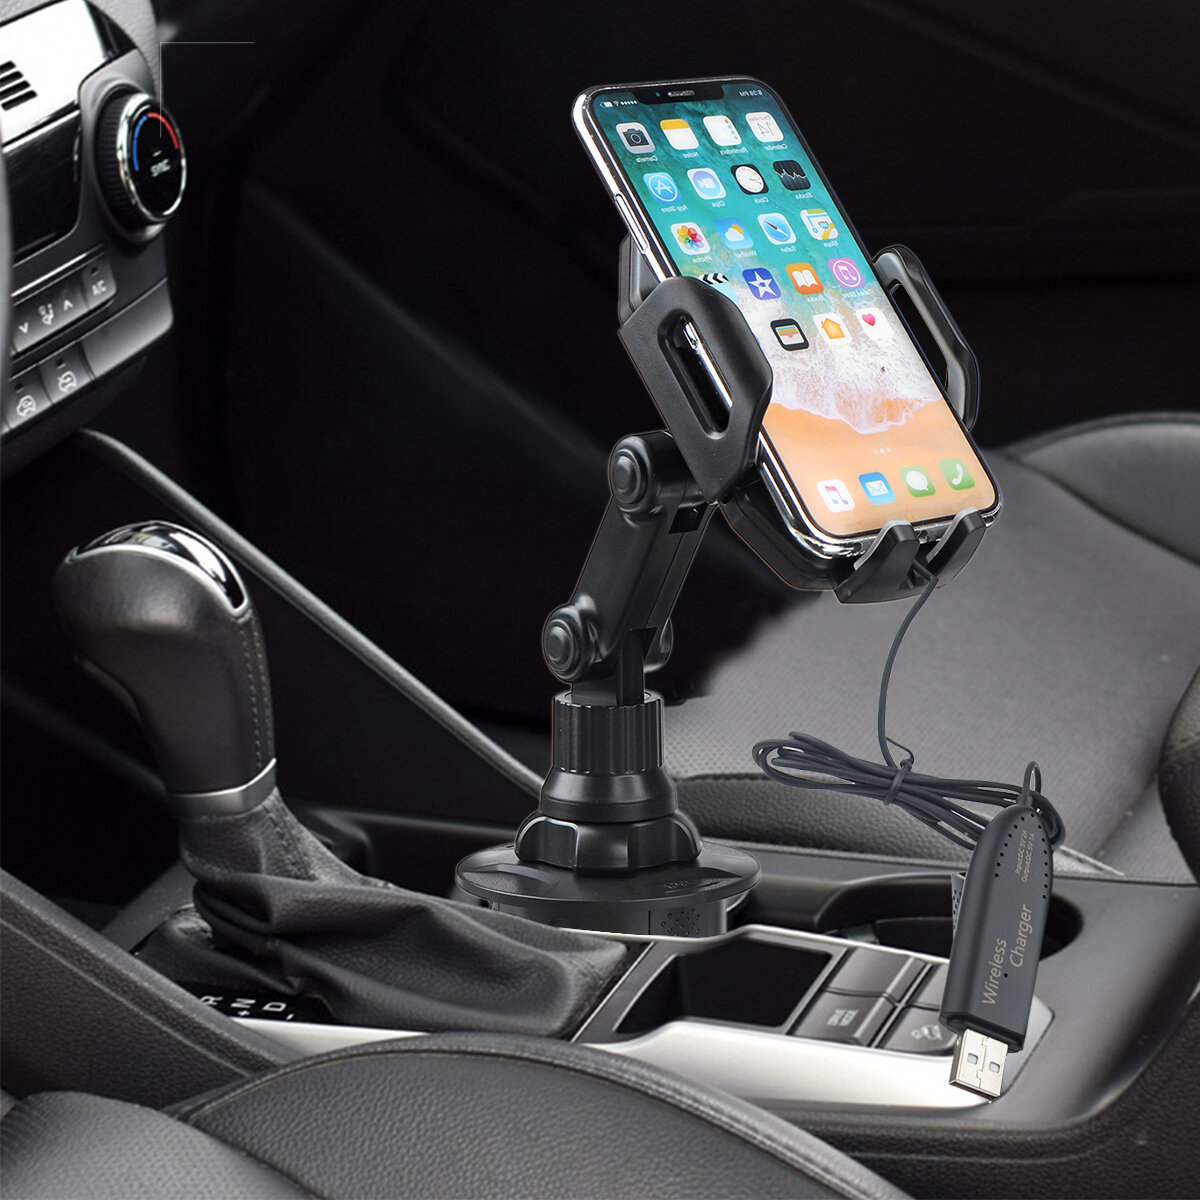 

Bakeey Universal Car Mount 360° Adjustable Cup Holder Cradle Wireless Charger for iPhone 12 for Samsung Galaxy Note S20